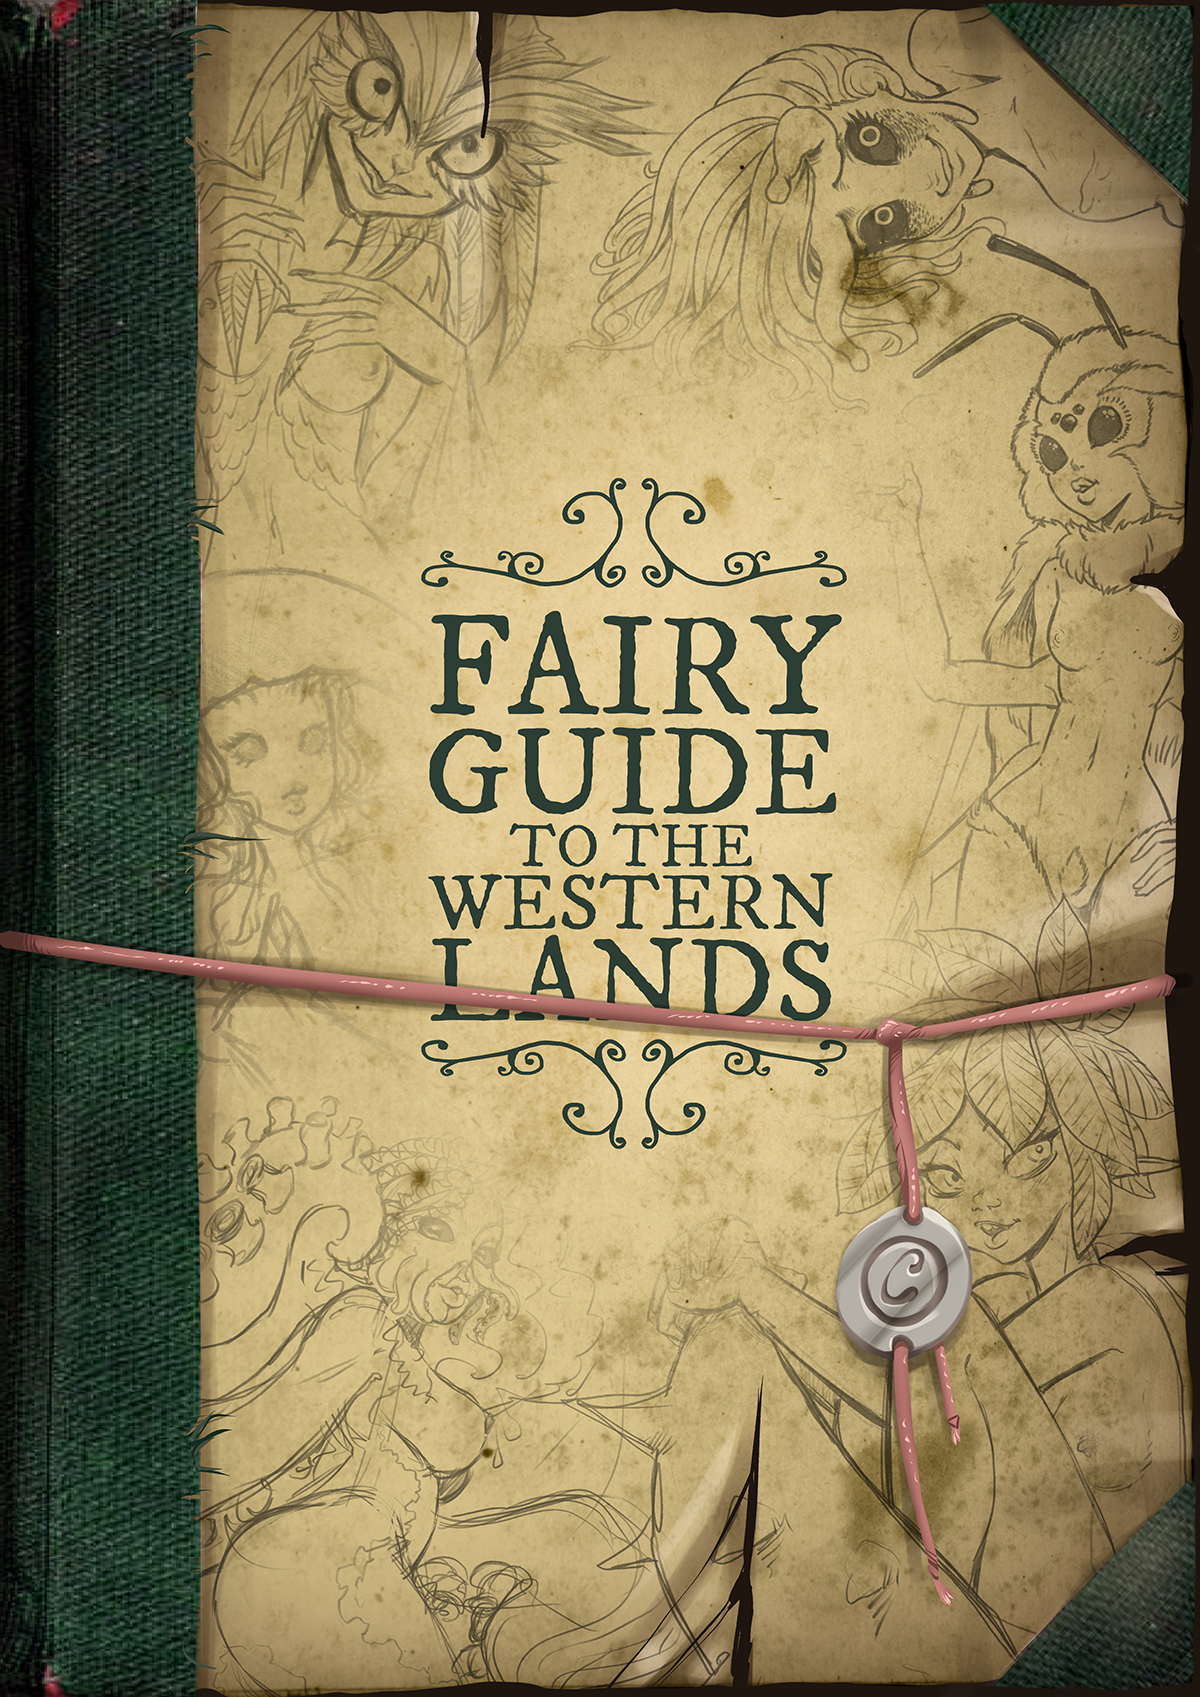 Fairy Guide to the Western Lands is out!